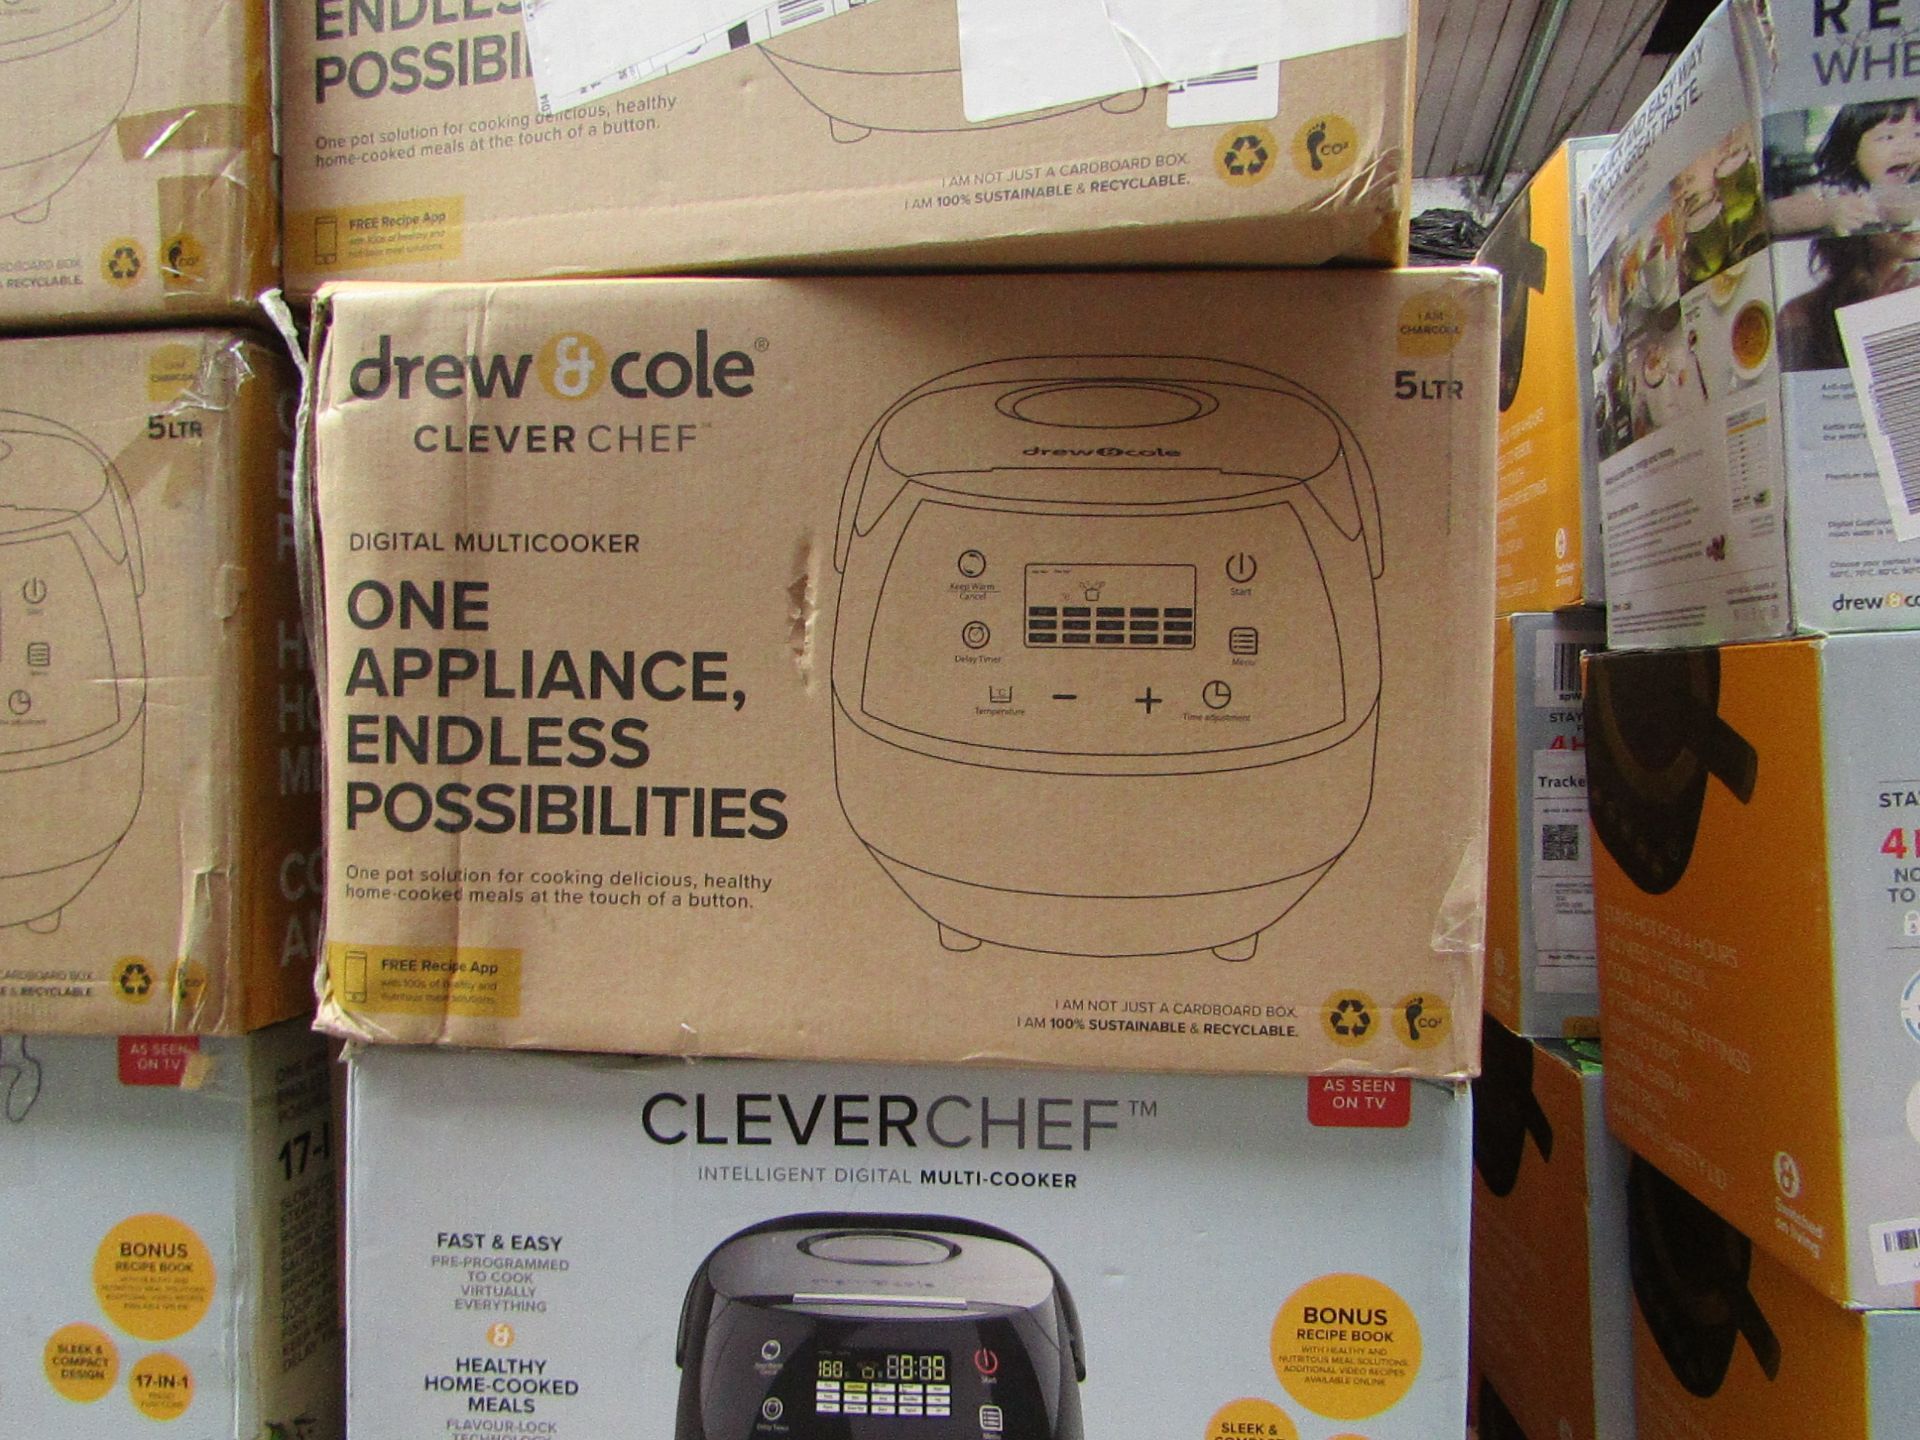 | 5X | DREW AND COLE CLEVER CHEFS | UNCHECKED AND BOXED | NO ONLINE RESALE | SKU C5060541513587 |